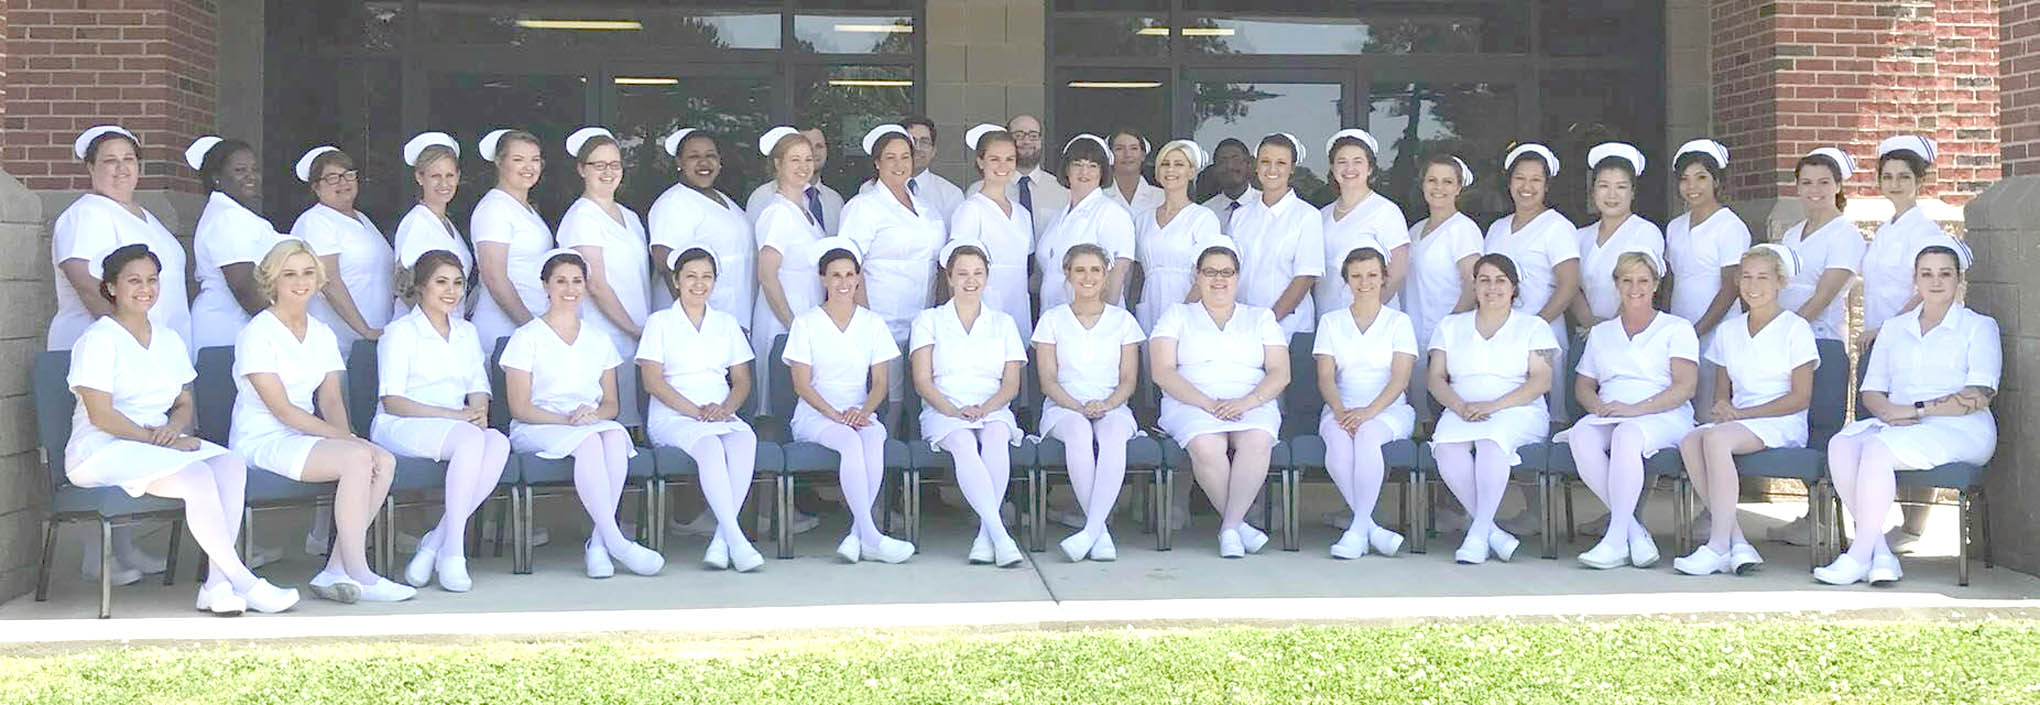 CCCC holds Pinning and Candlelighting Ceremony for Nursing graduates